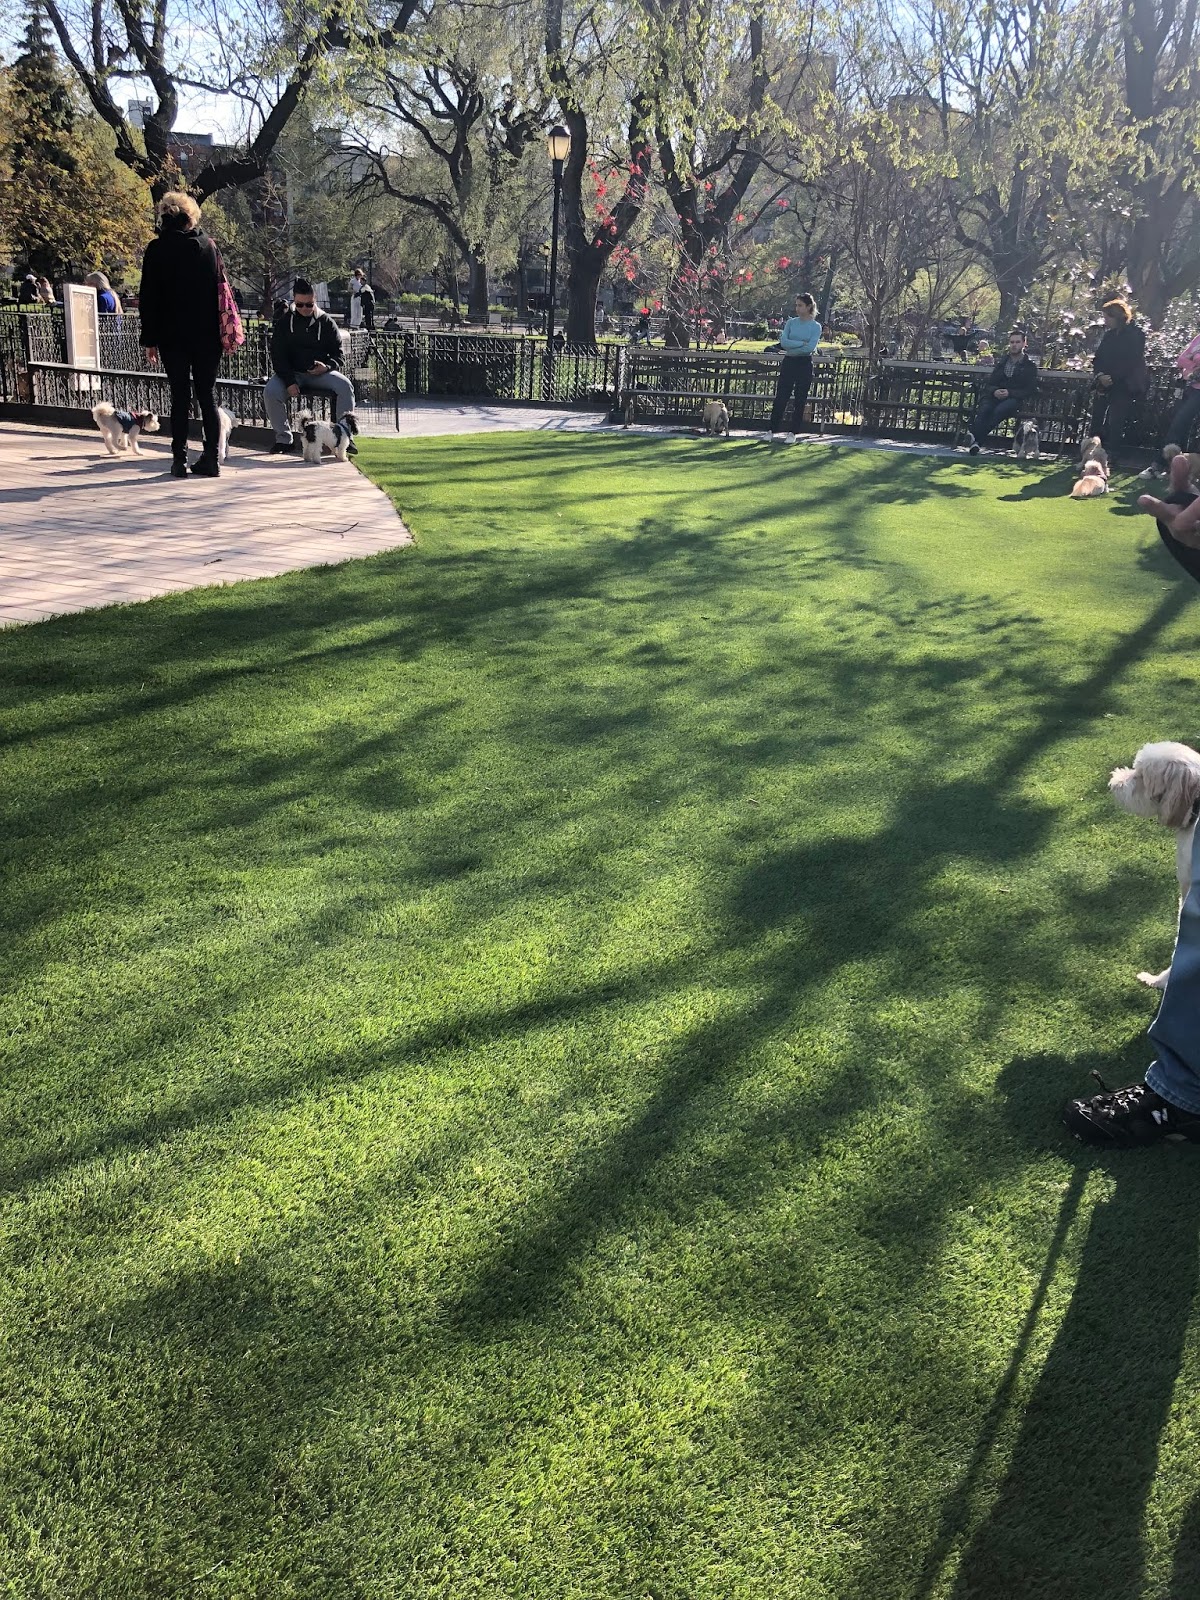 Ev Grieve Renovated Small Dog Run Reopens In Tompkins Square Park